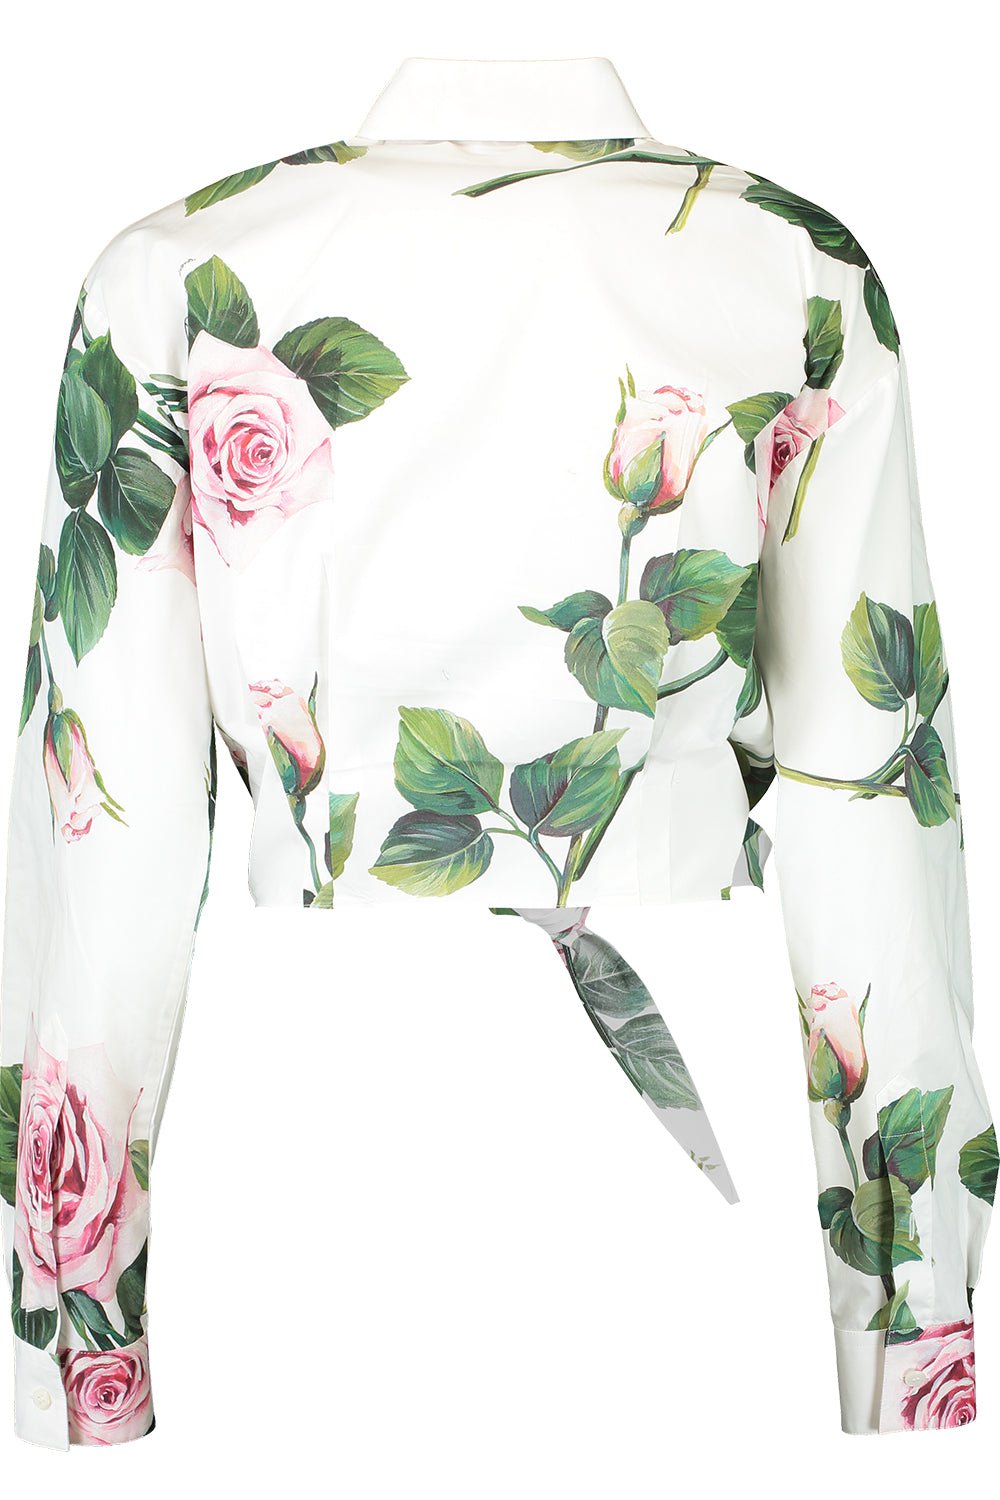 DOLCE & GABBANA-Tropical Rose Print Cropped Tie Blouse-ROSE